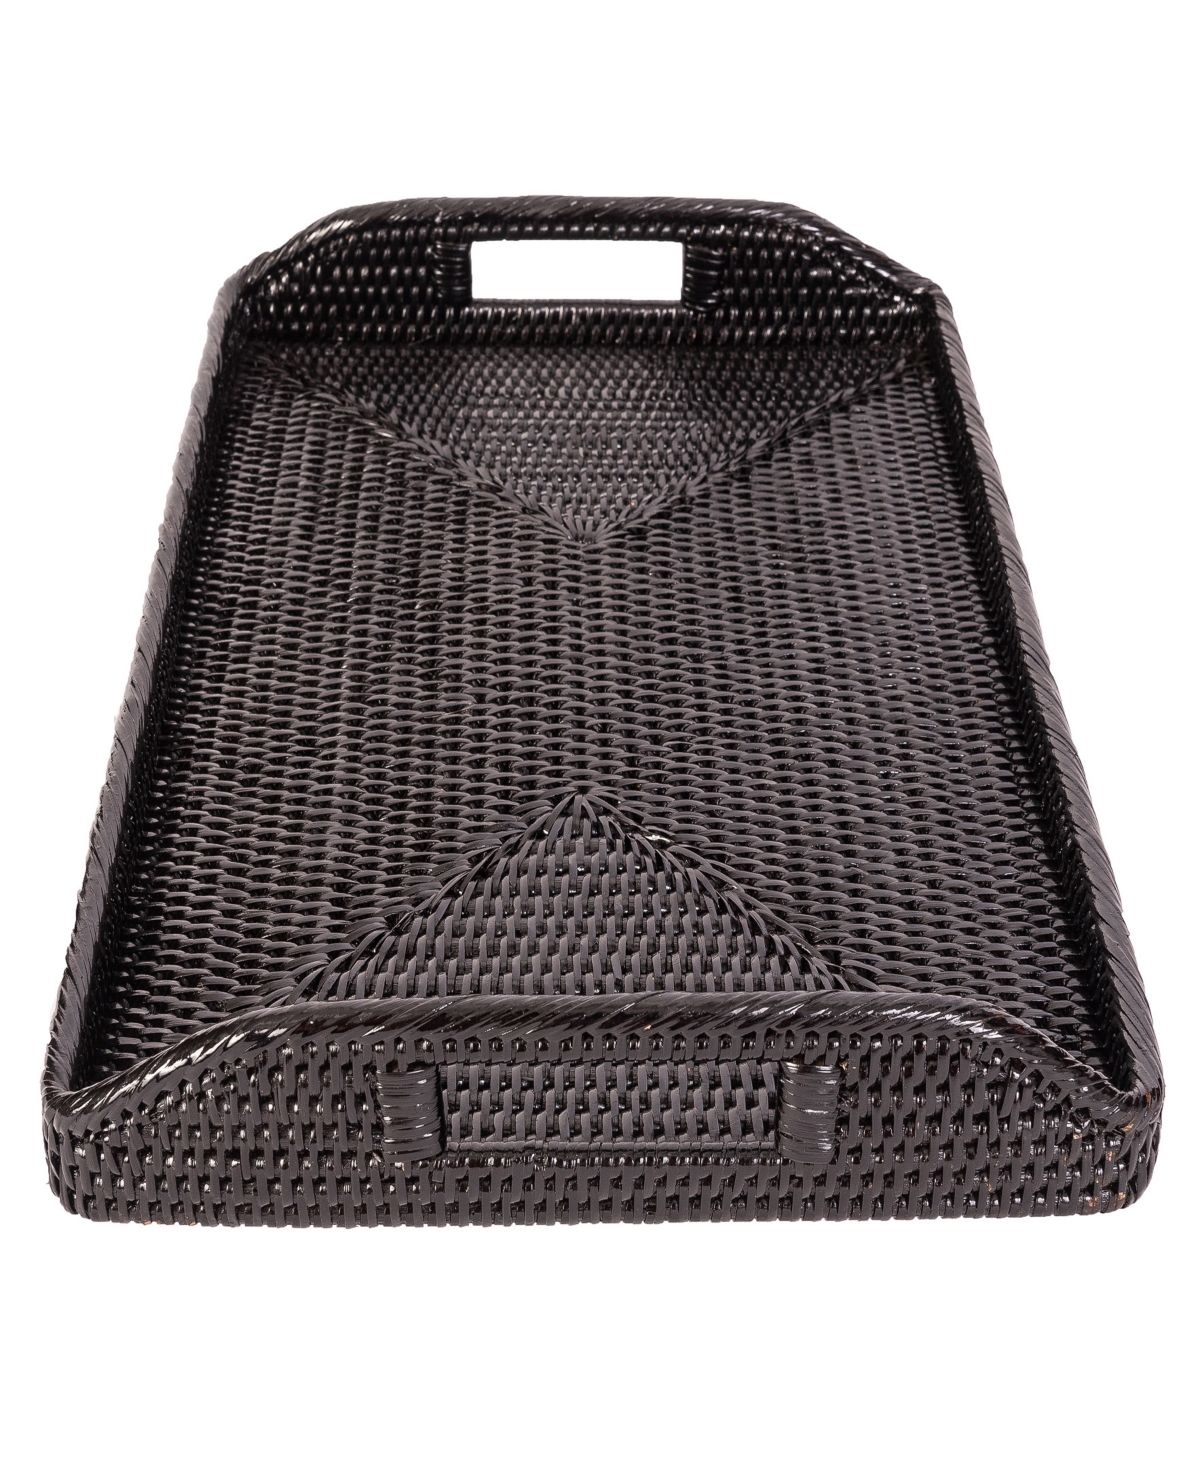 Artifacts Trading Company Rattan 14" Rectangular Serving Tray With High Handles In Tudor Black